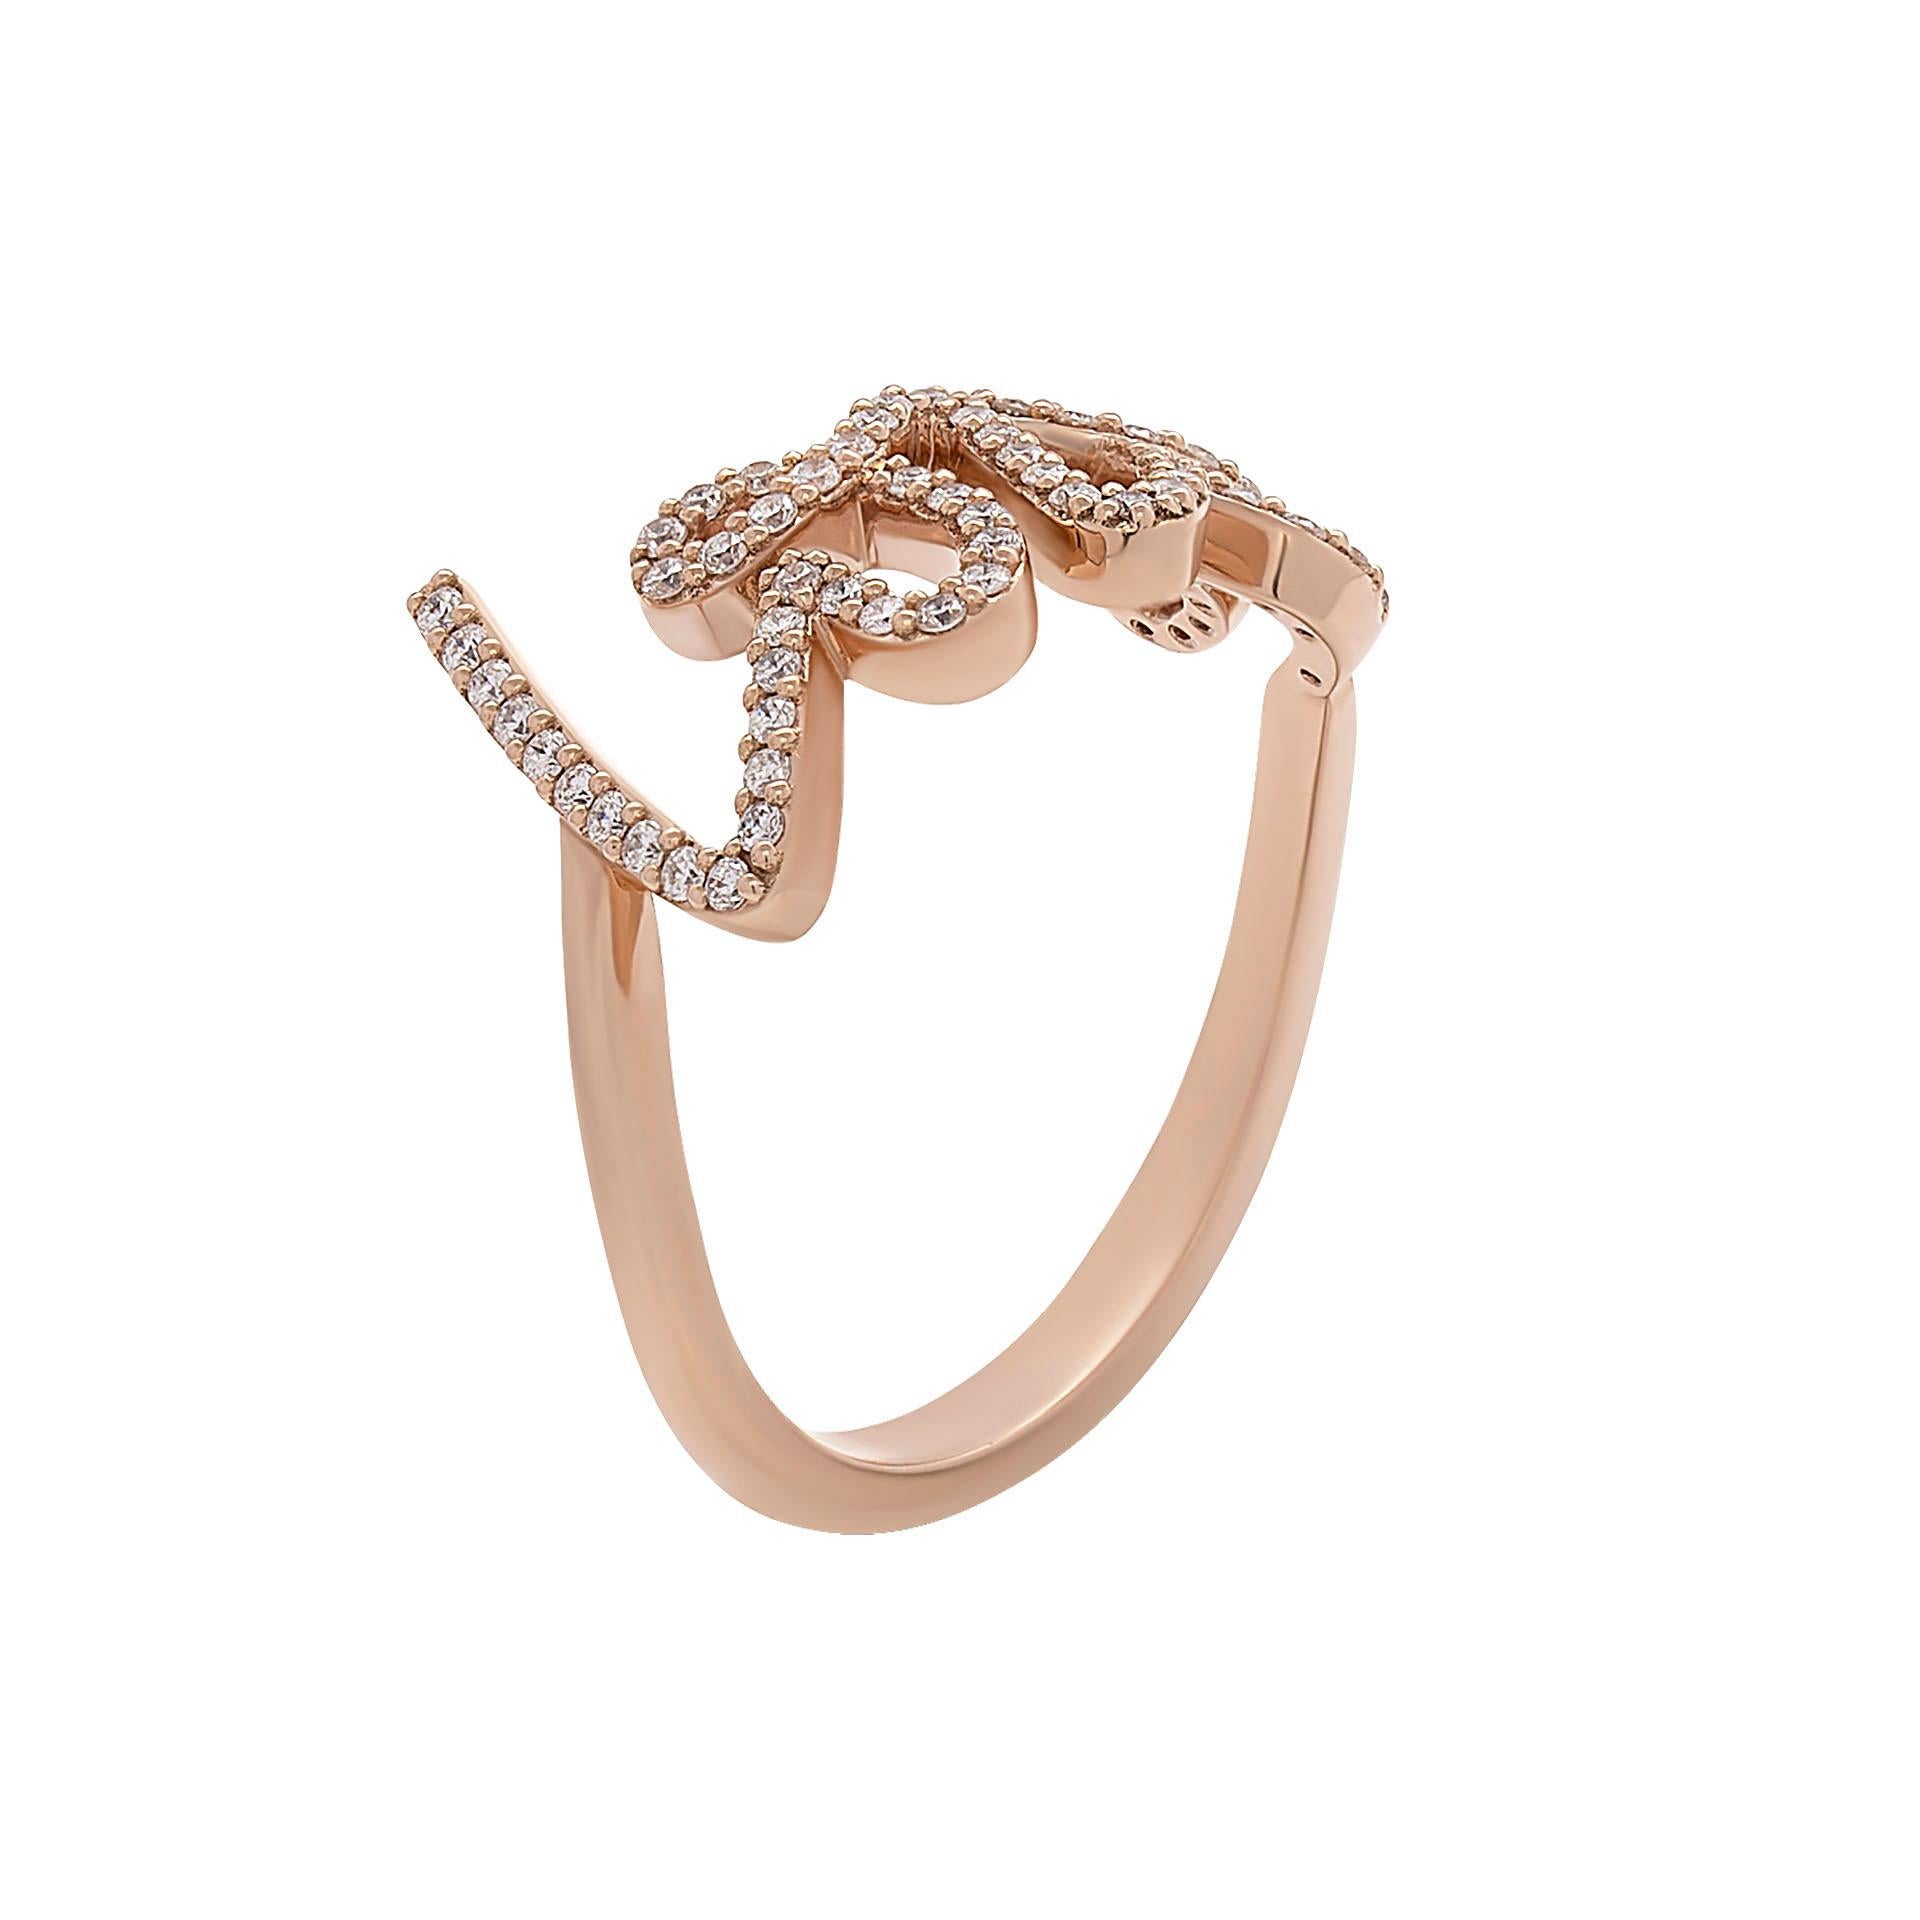 Love ring in 14k Rose Gold TCW:0.20ct Size: 5.5